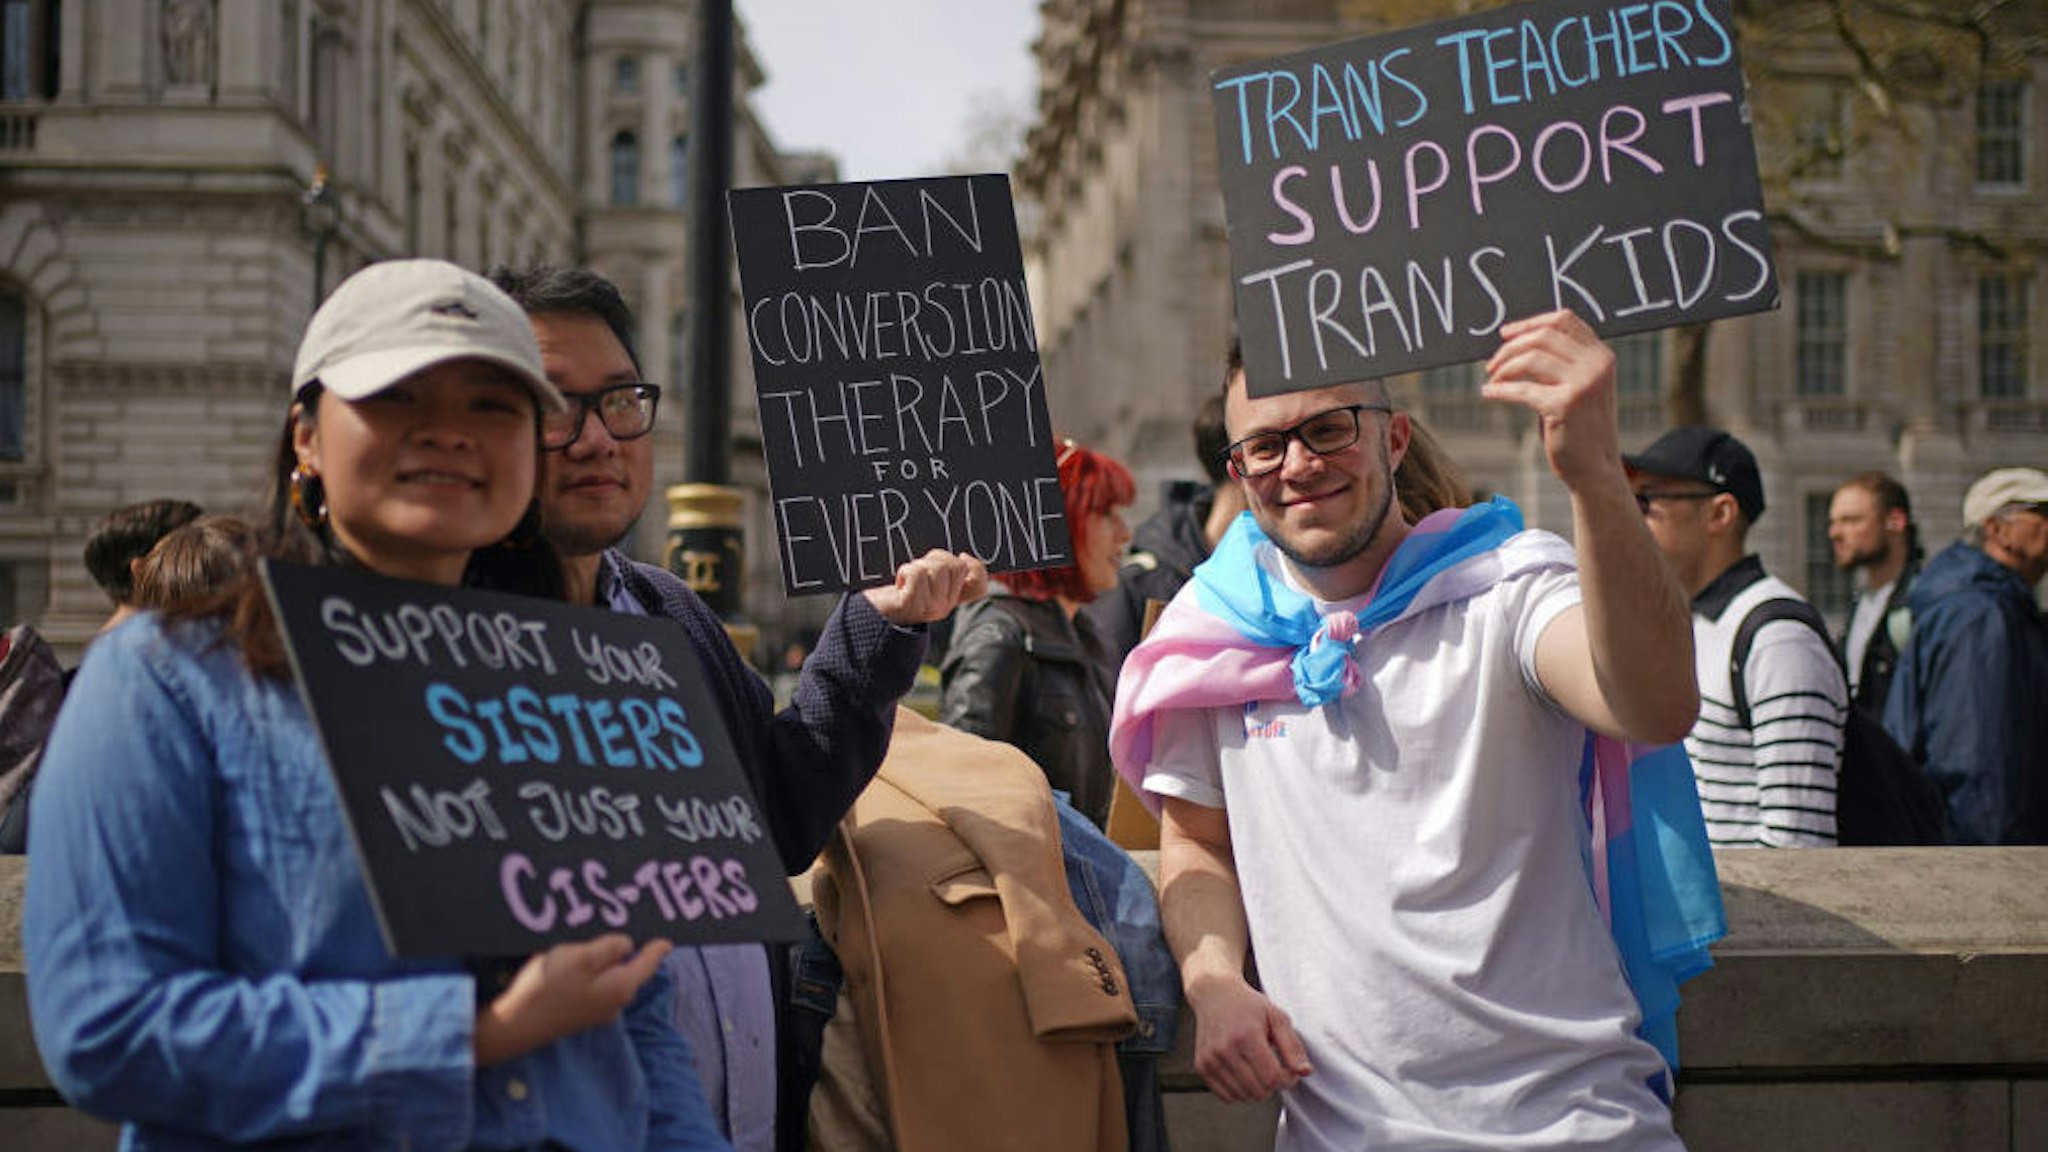 People take part in a protest outside Downing Street in London, over transgender people not being included in plans to ban conversion therapy. Picture date: Sunday April 10, 2022.